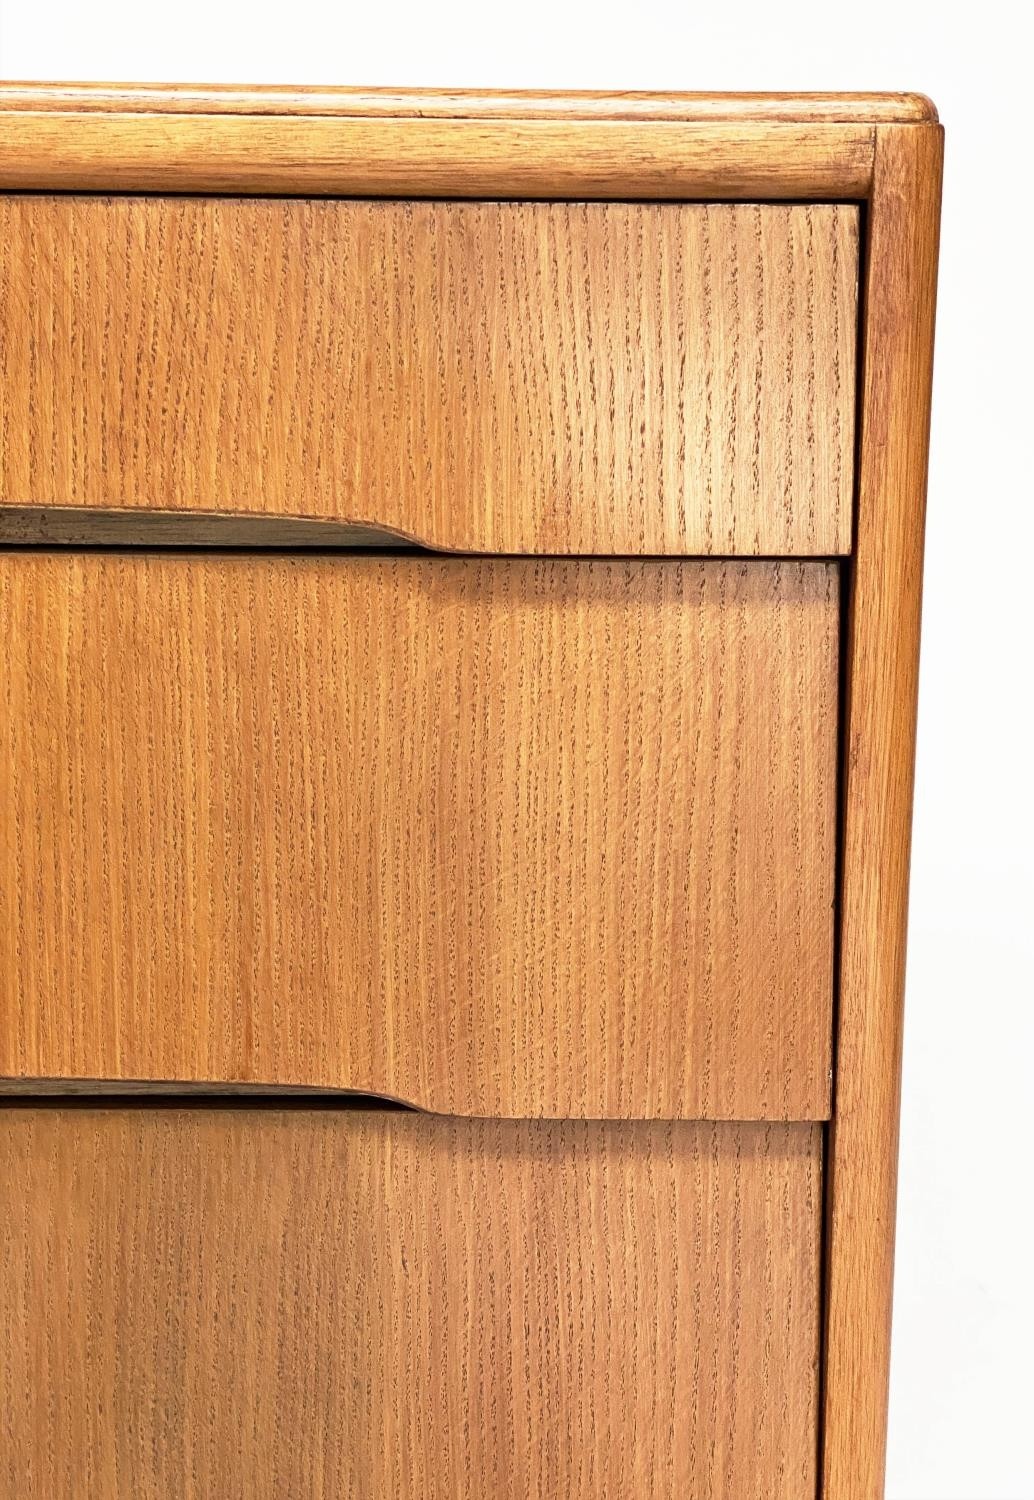 AVALON YATTON CHEST, 1970s oak, with three long drawers and splay supports, 91cm W x 42cm D x 70cm. - Image 5 of 8